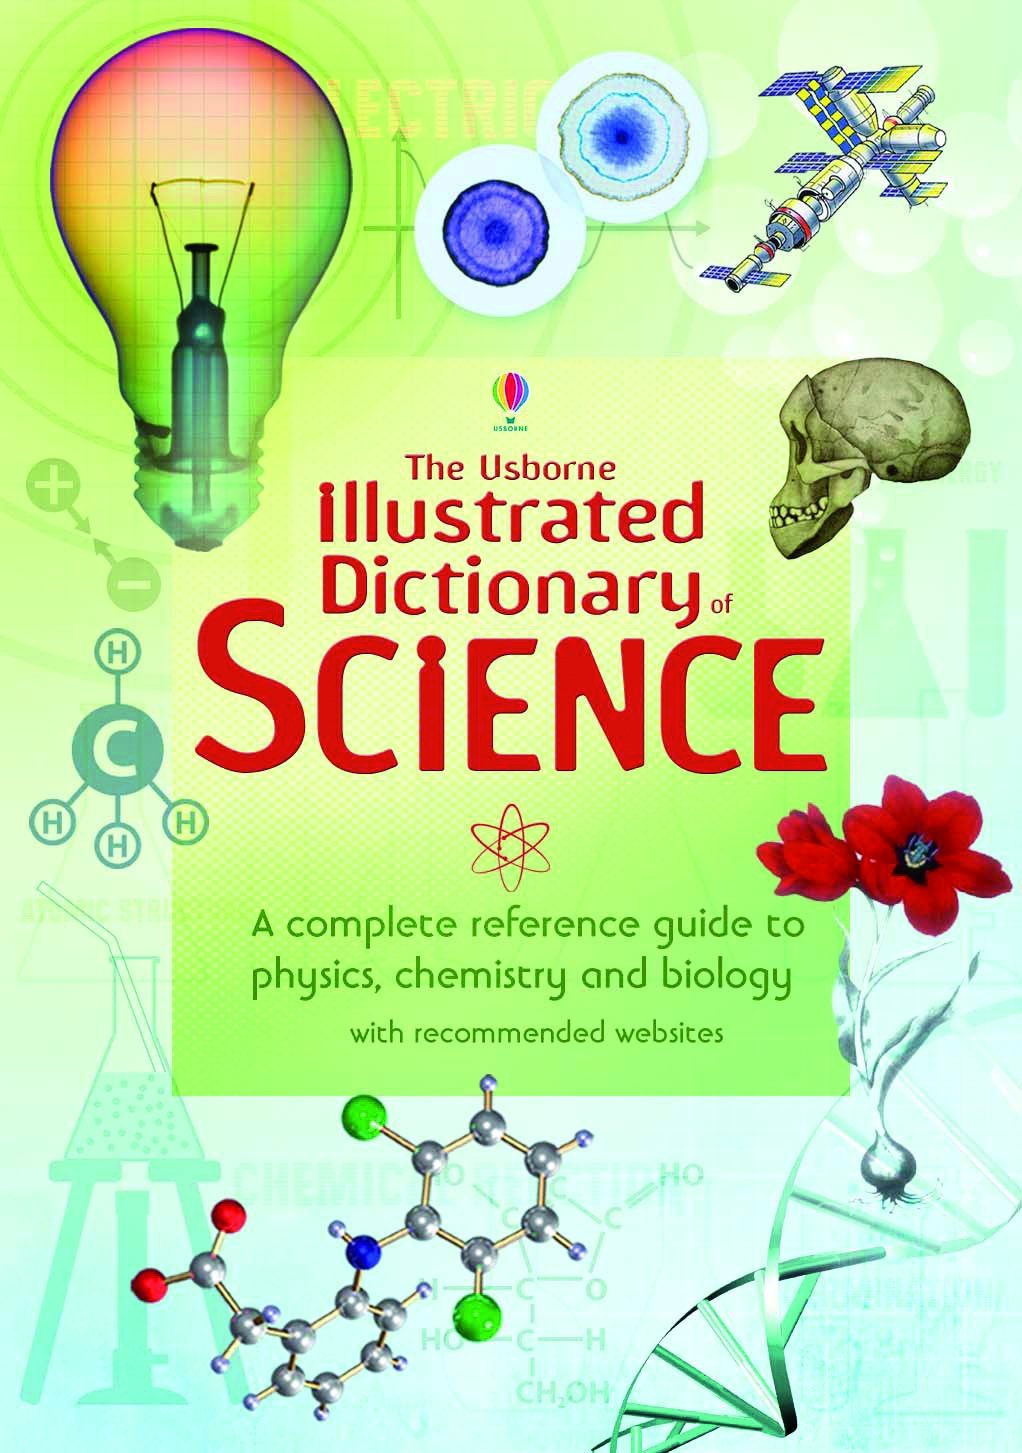 The Usborne Ilustrated Dictionary of Science